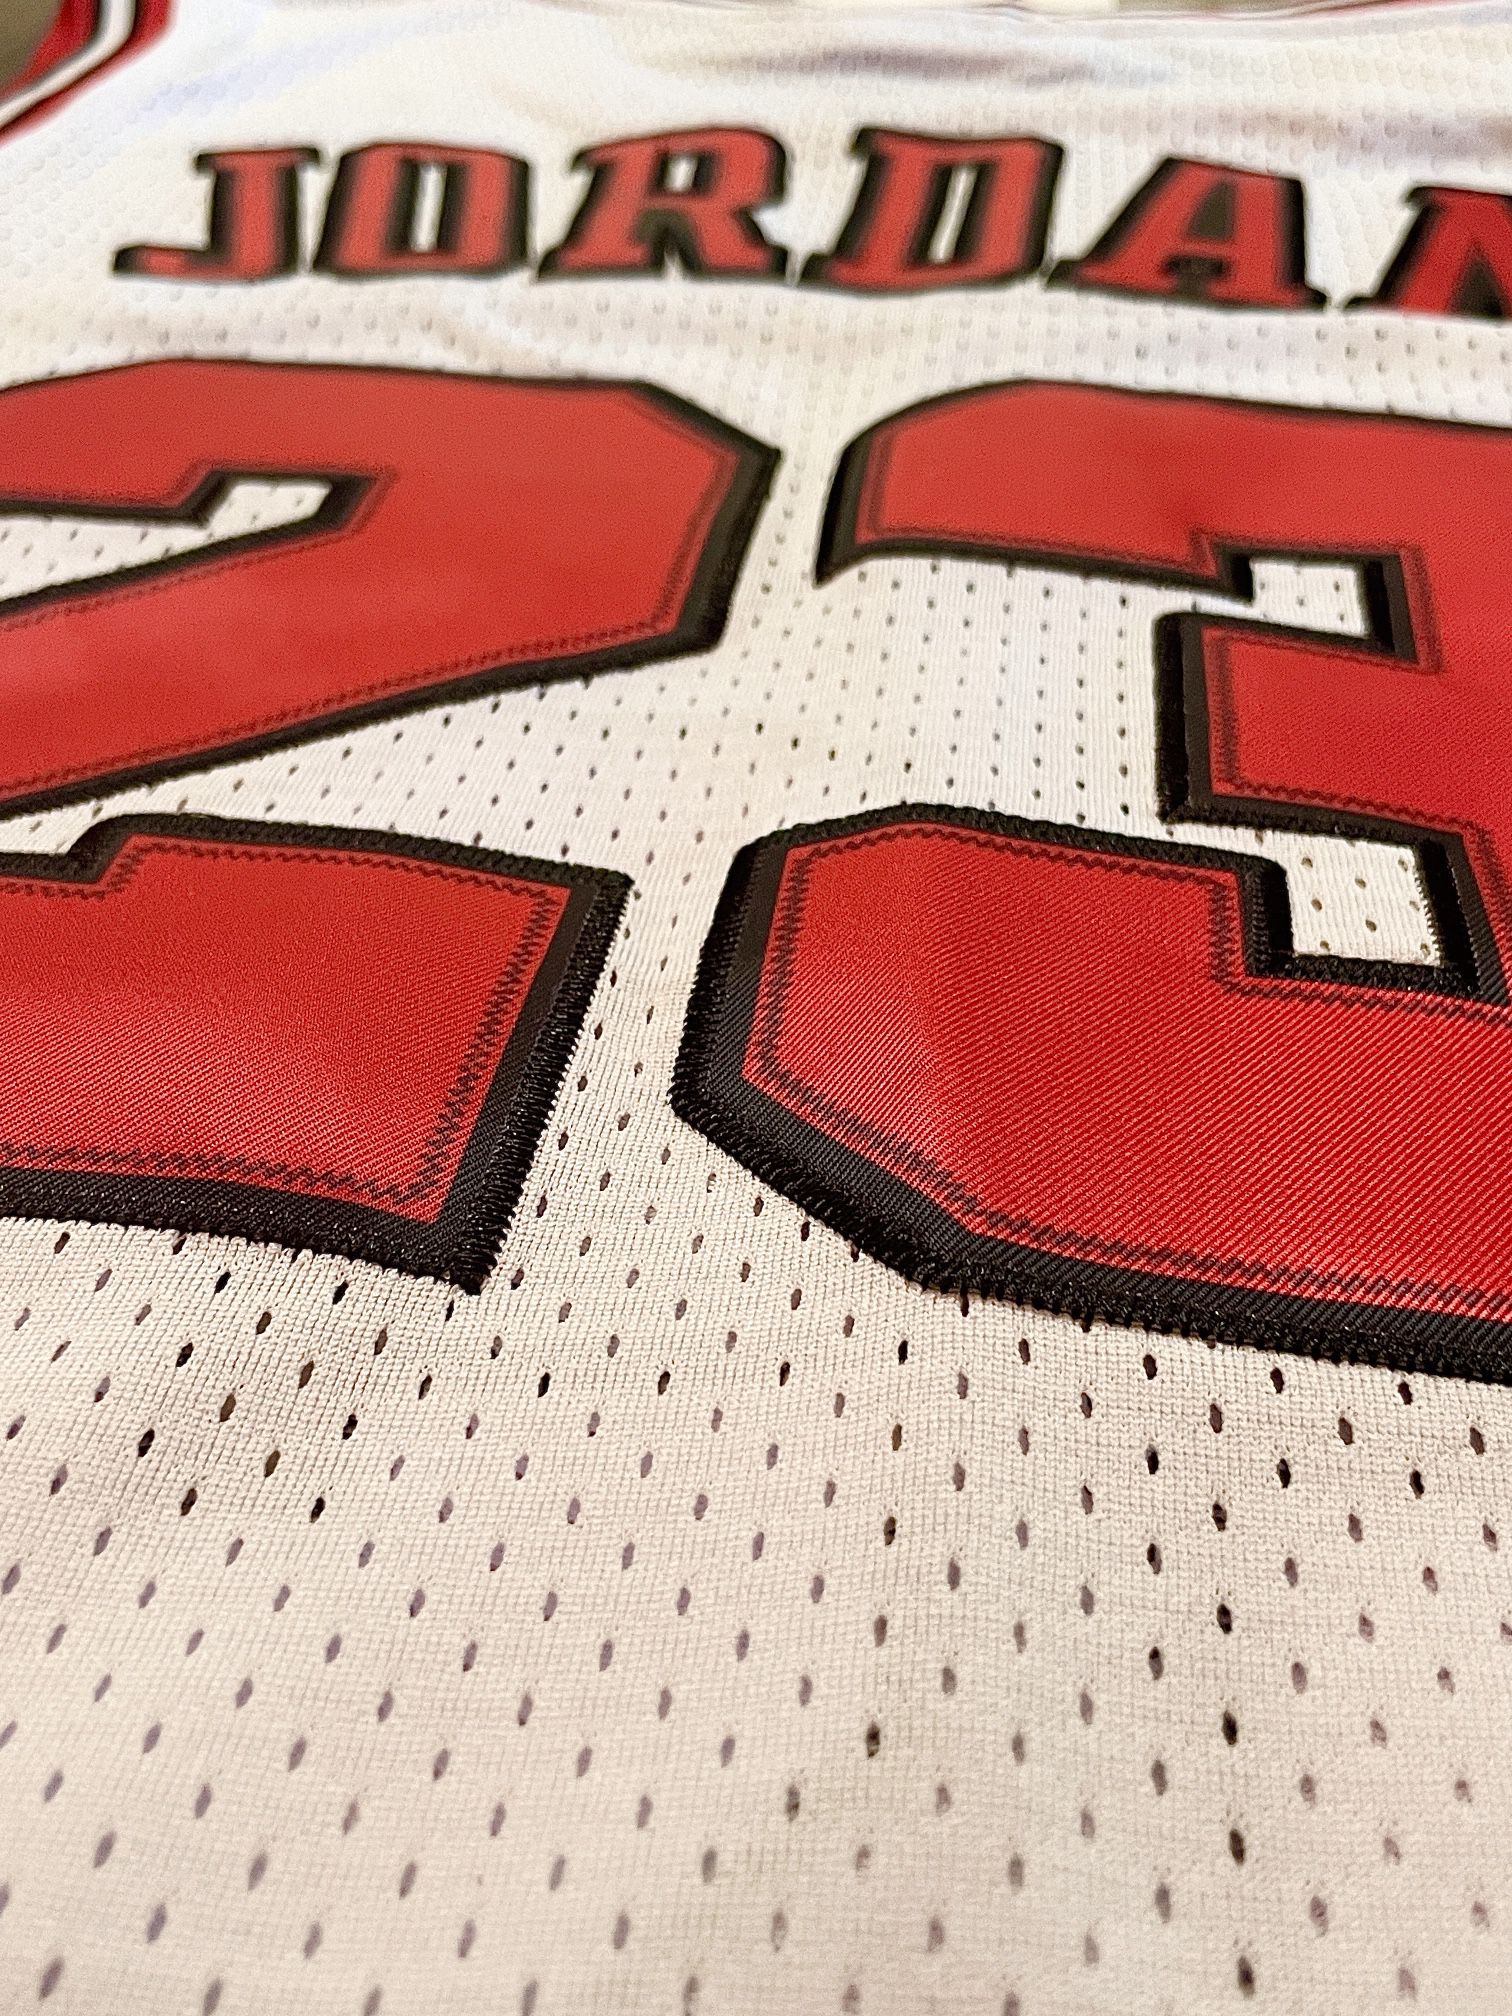 Chicago Bulls #23 Michael Jordan 97-98 NBA All Star Game Retro Basketball  Jersey - S.M.XL.2X for Sale in Lawndale, CA - OfferUp